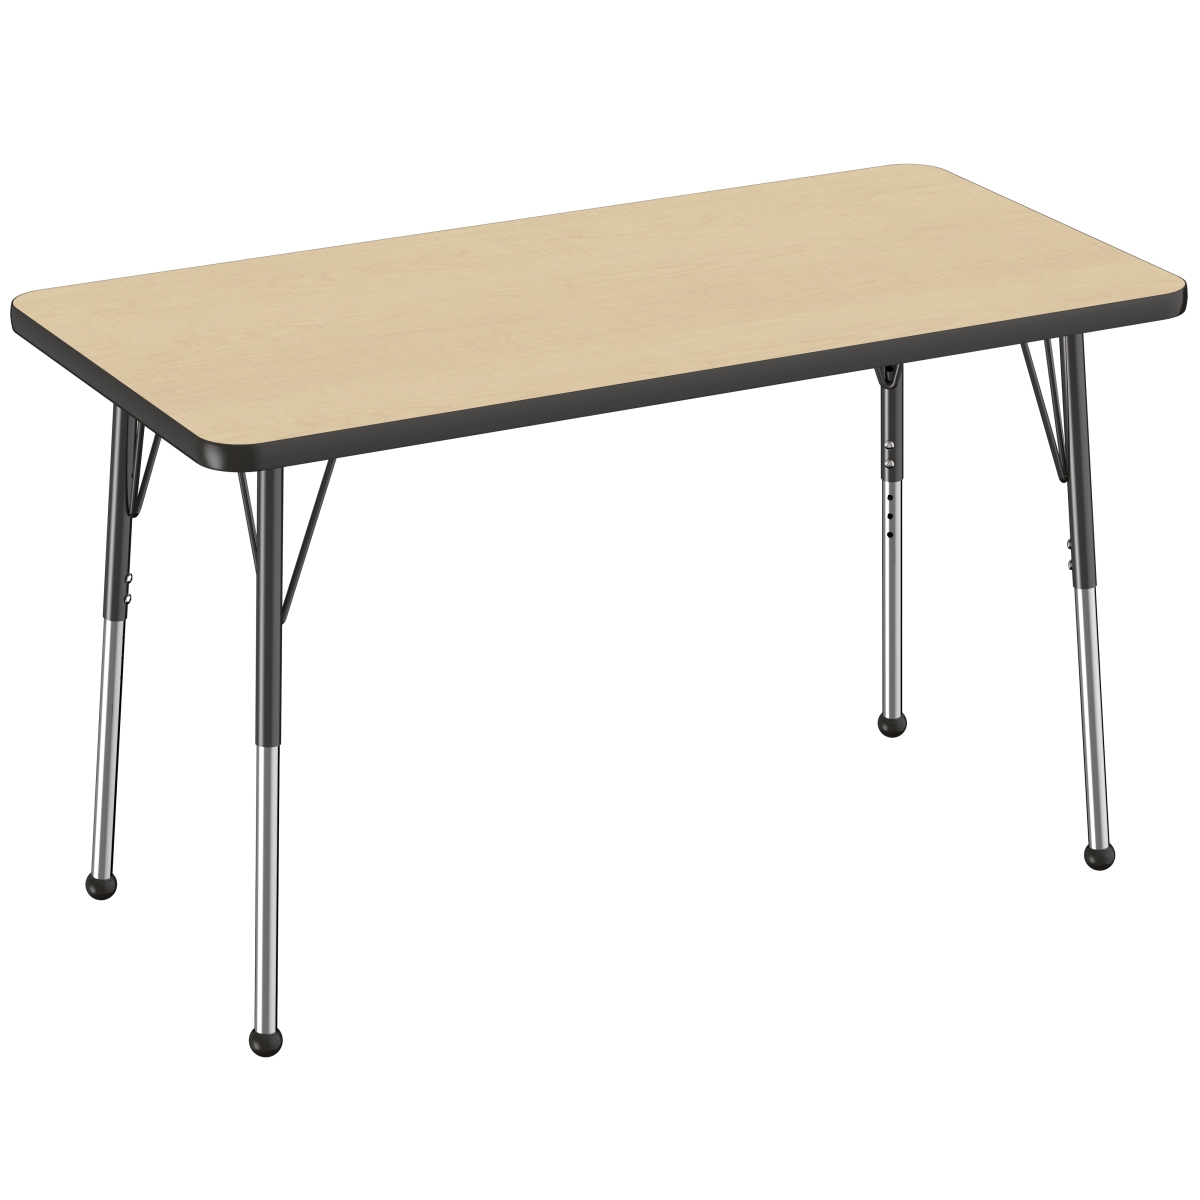 10008-mpbk 24 X 48 In. Rectangle T-mold Adjustable Activity Table With Standard Ball - Maple & Black